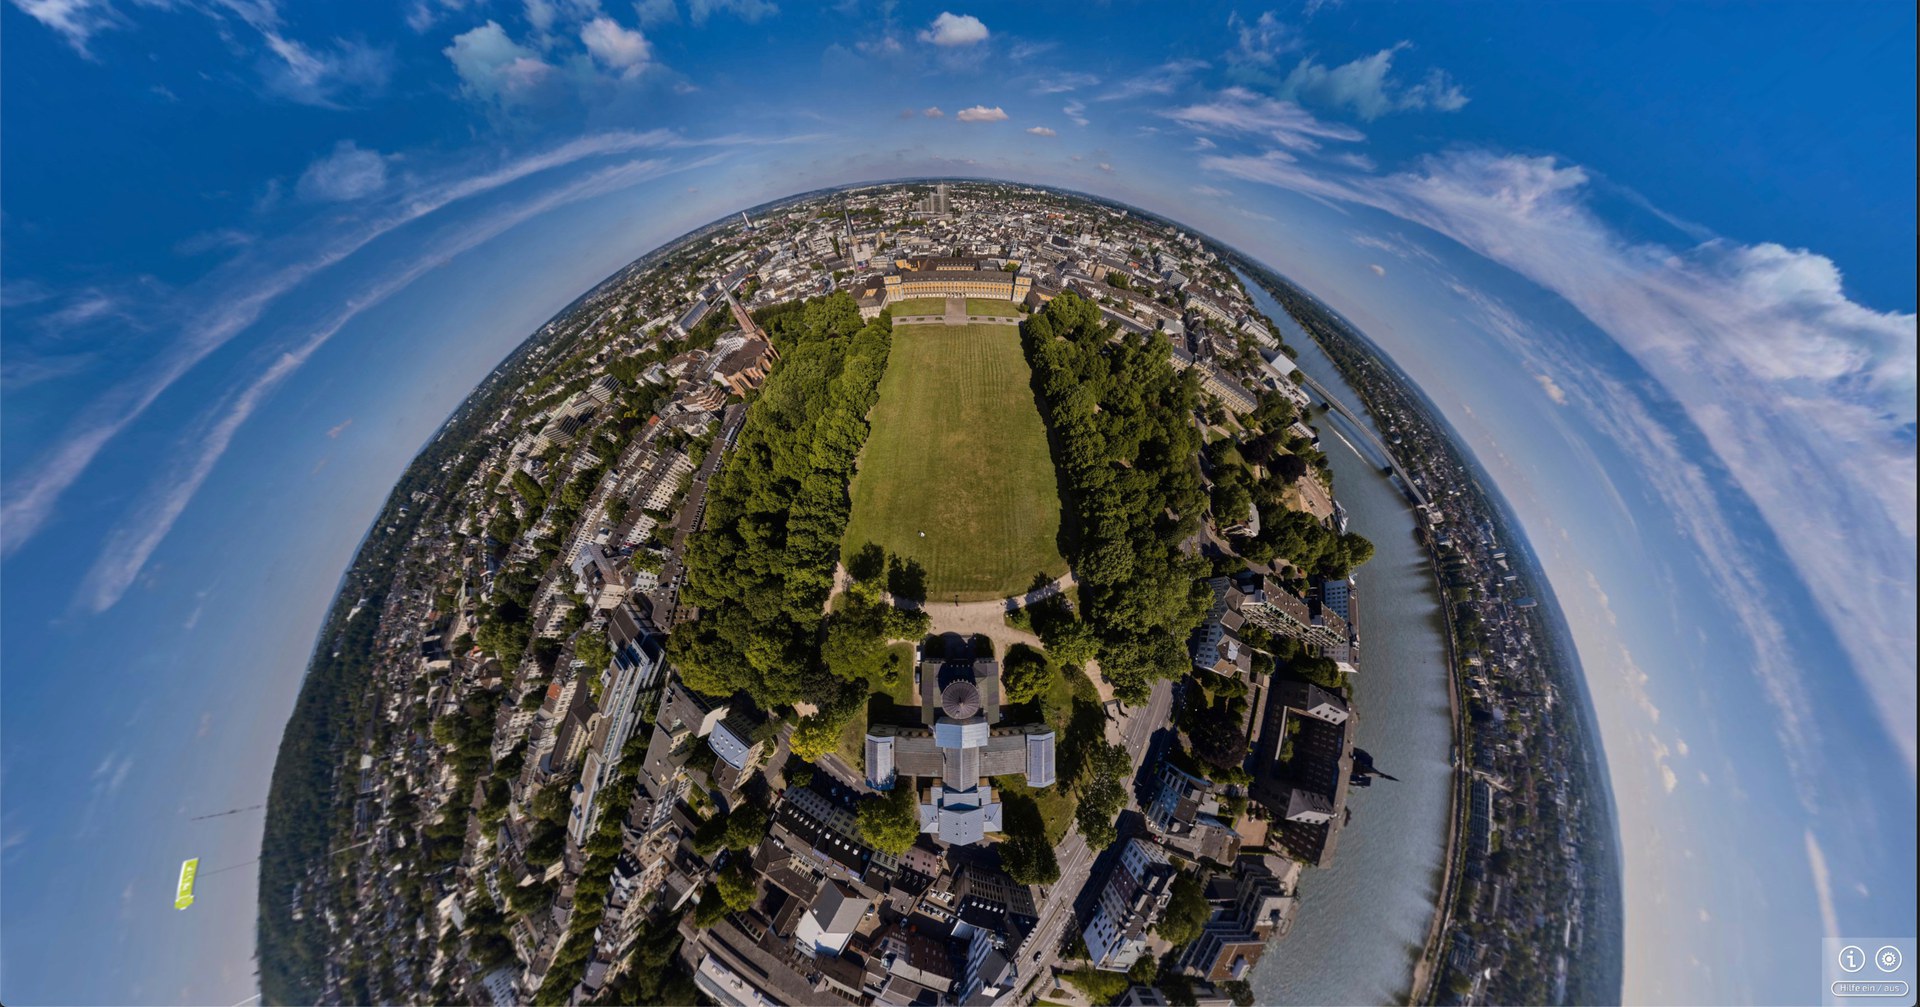 360-degree tour - The 360-degree image shows the airspace above Bonn's Hofgarten.